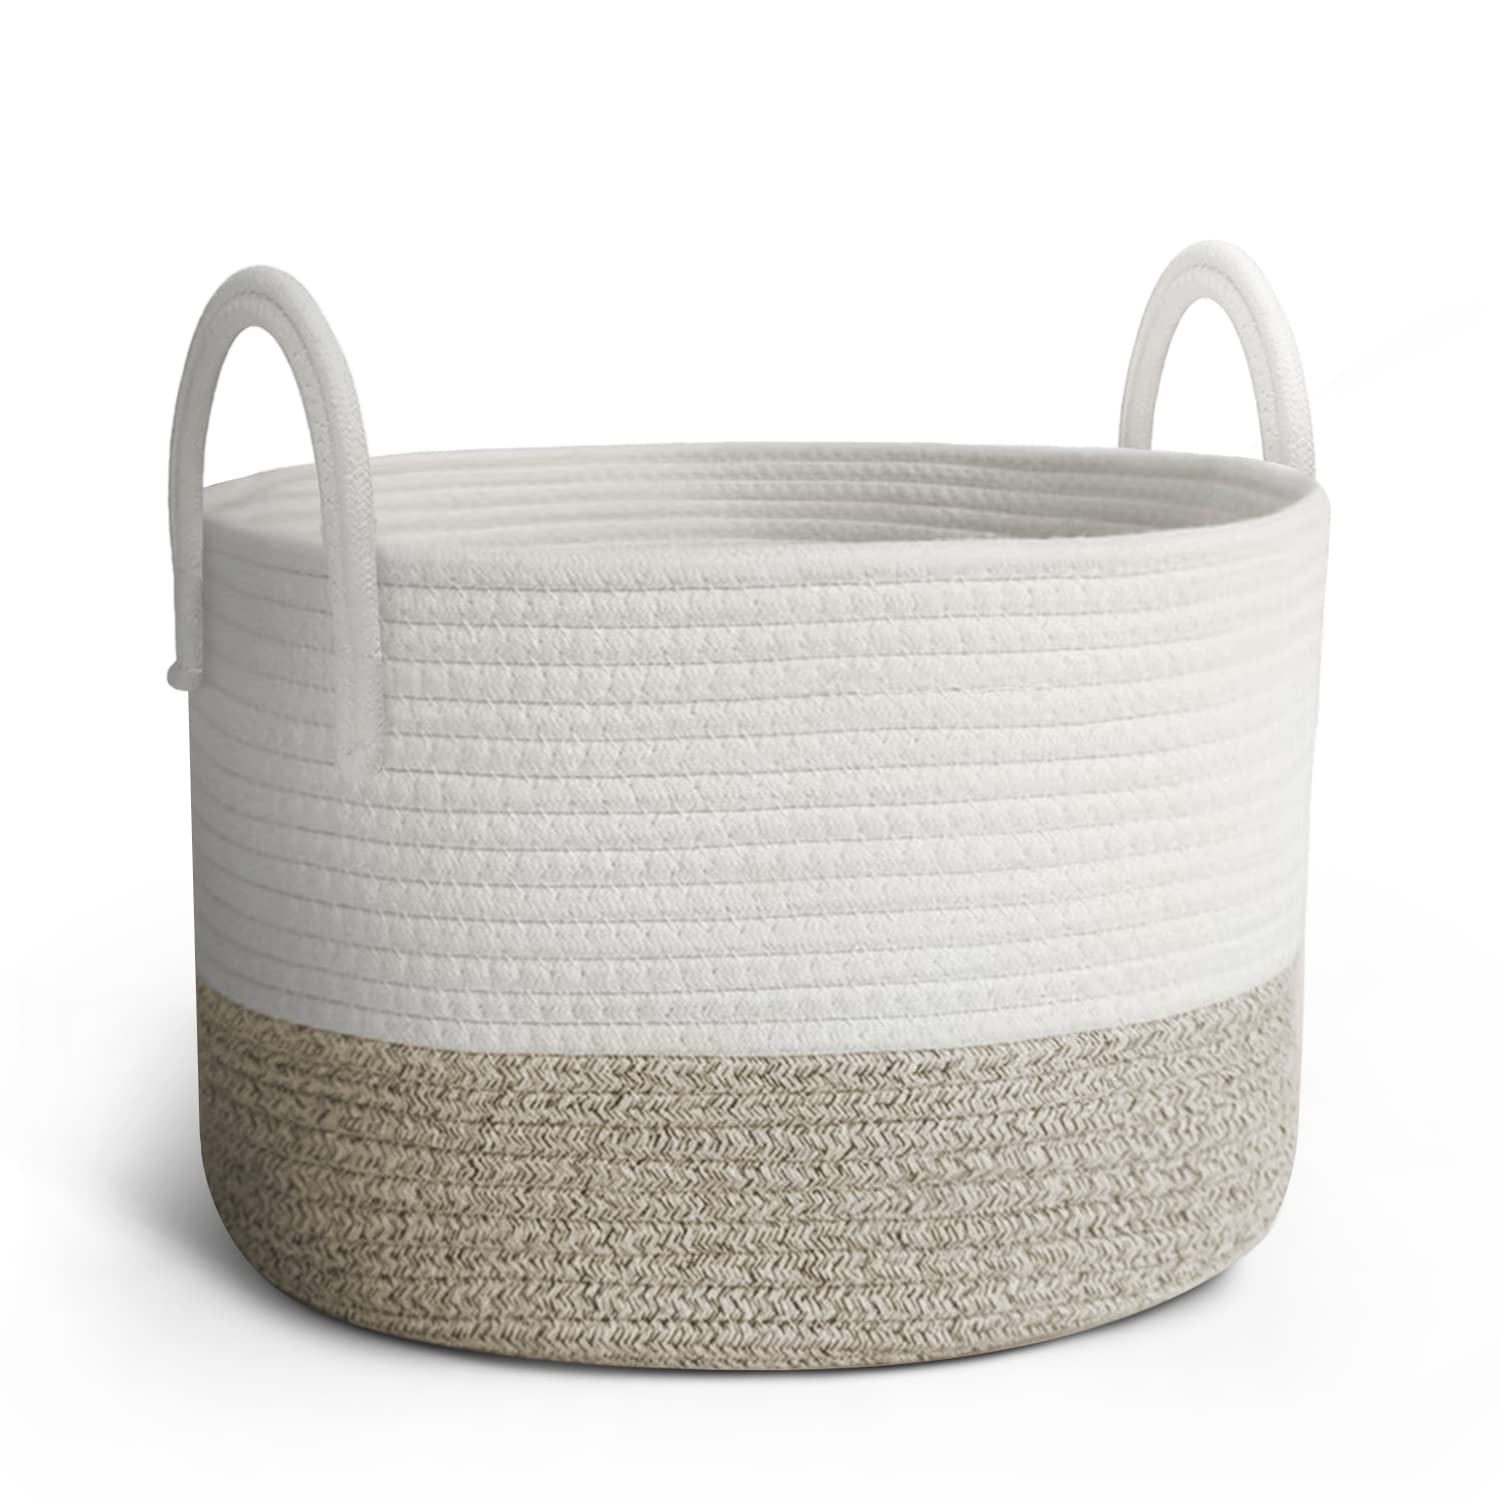 Rope Storage Baskets - Woven Two Tone Material Nursery Hamper with Handles